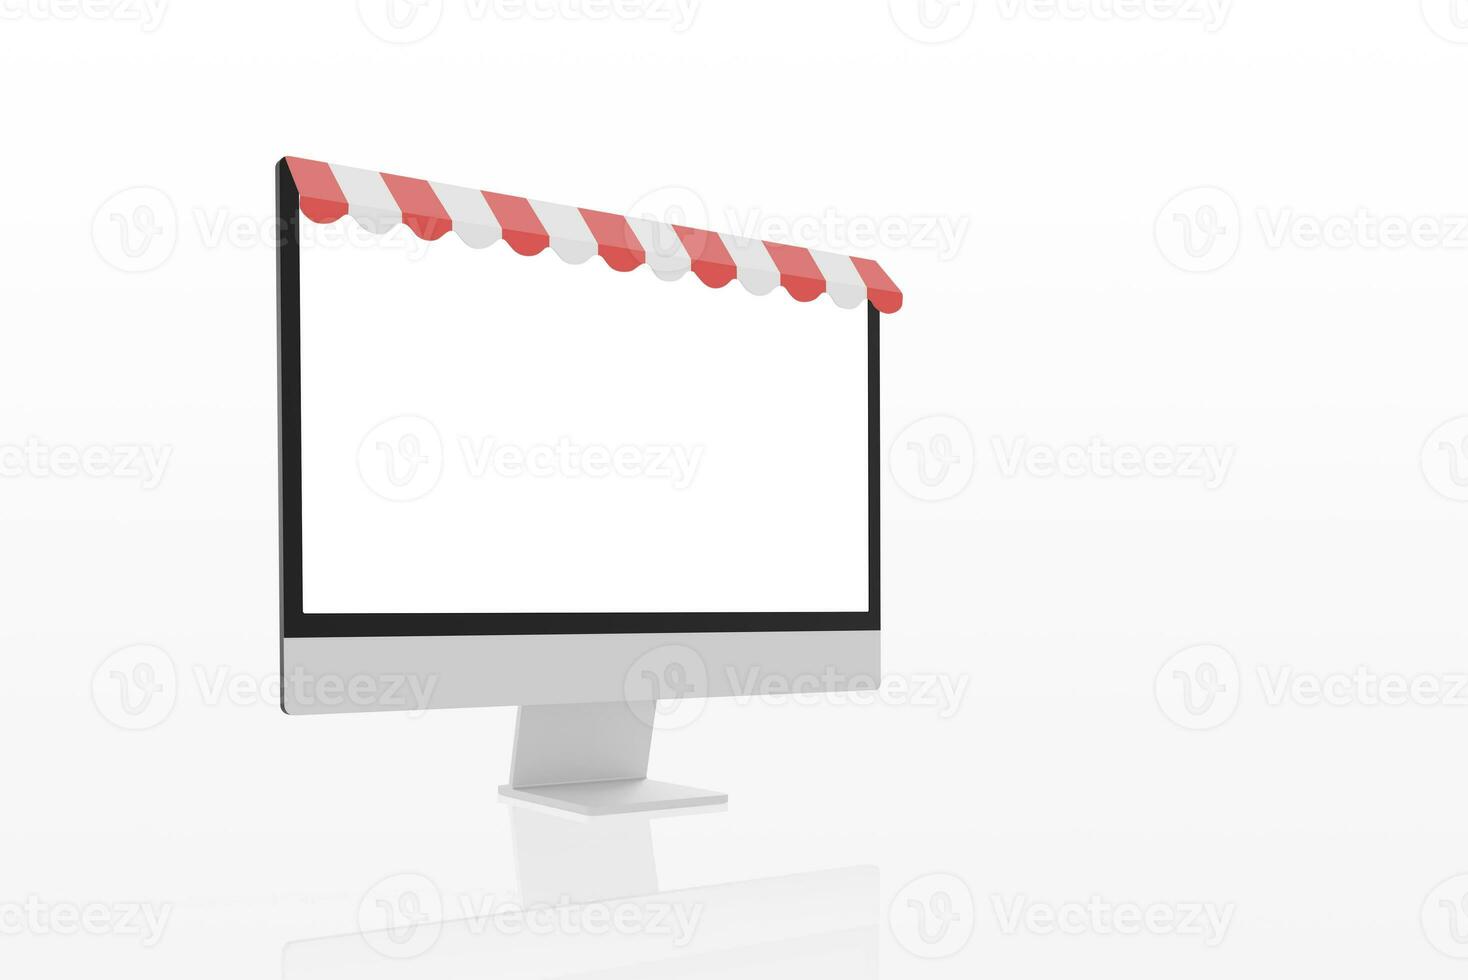 Generated imageComputer display mockup with red white shop awning concept. Online shopping store presentation display mockup photo